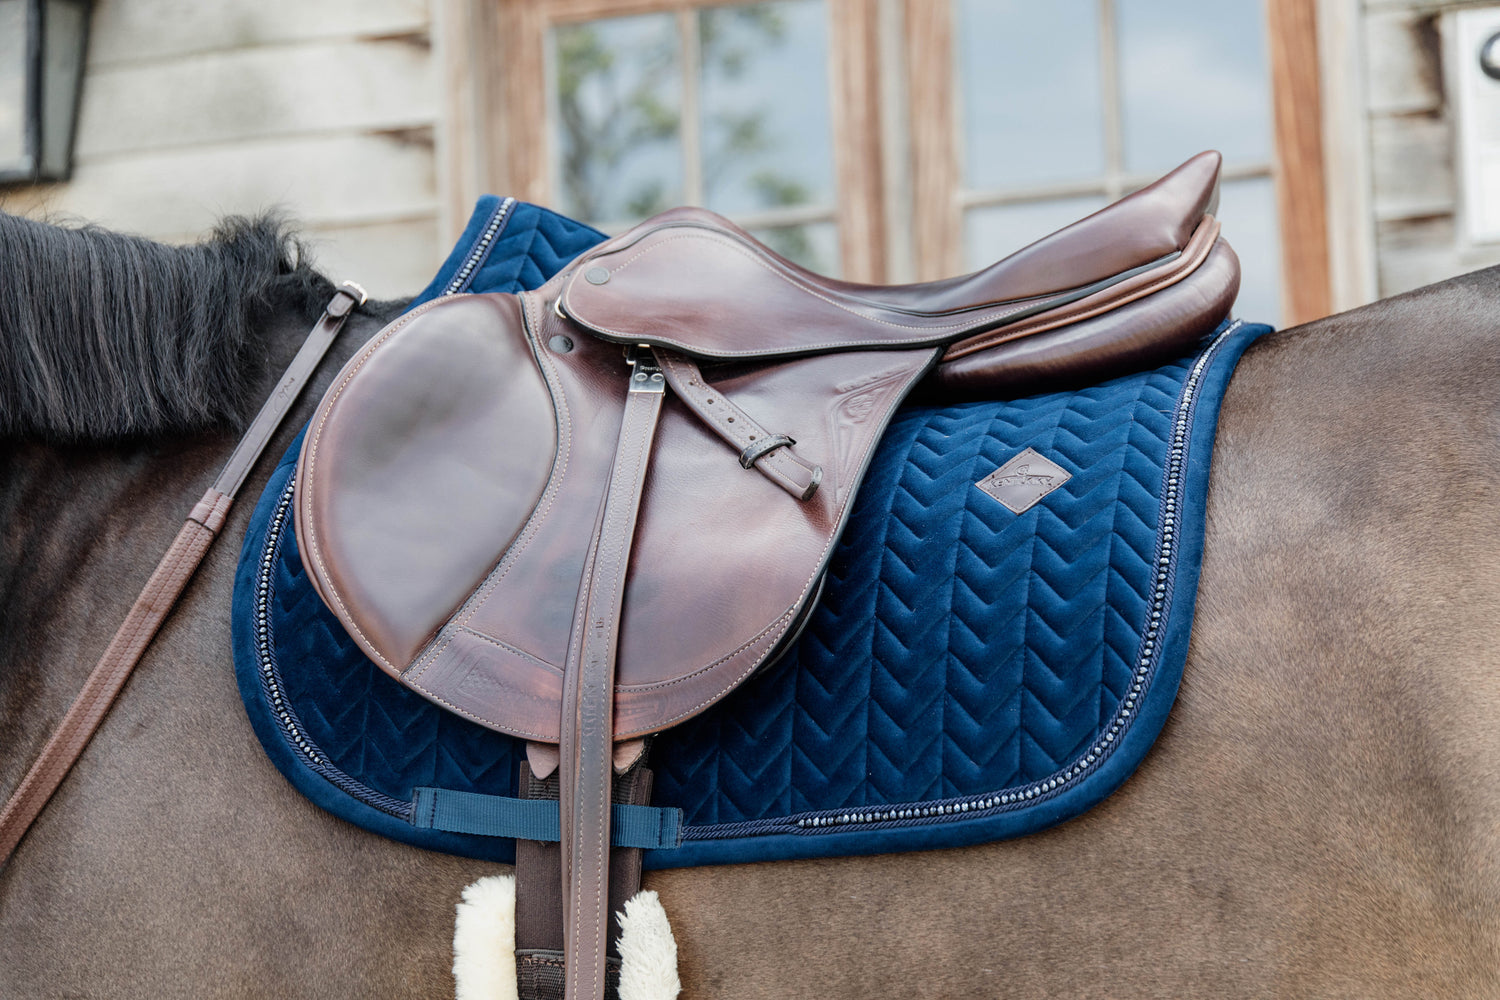 The Kentucky velvet saddles pad with self coloured pearls exudes luxury. Vegan Friendly leather Kentucky patch finishes the look